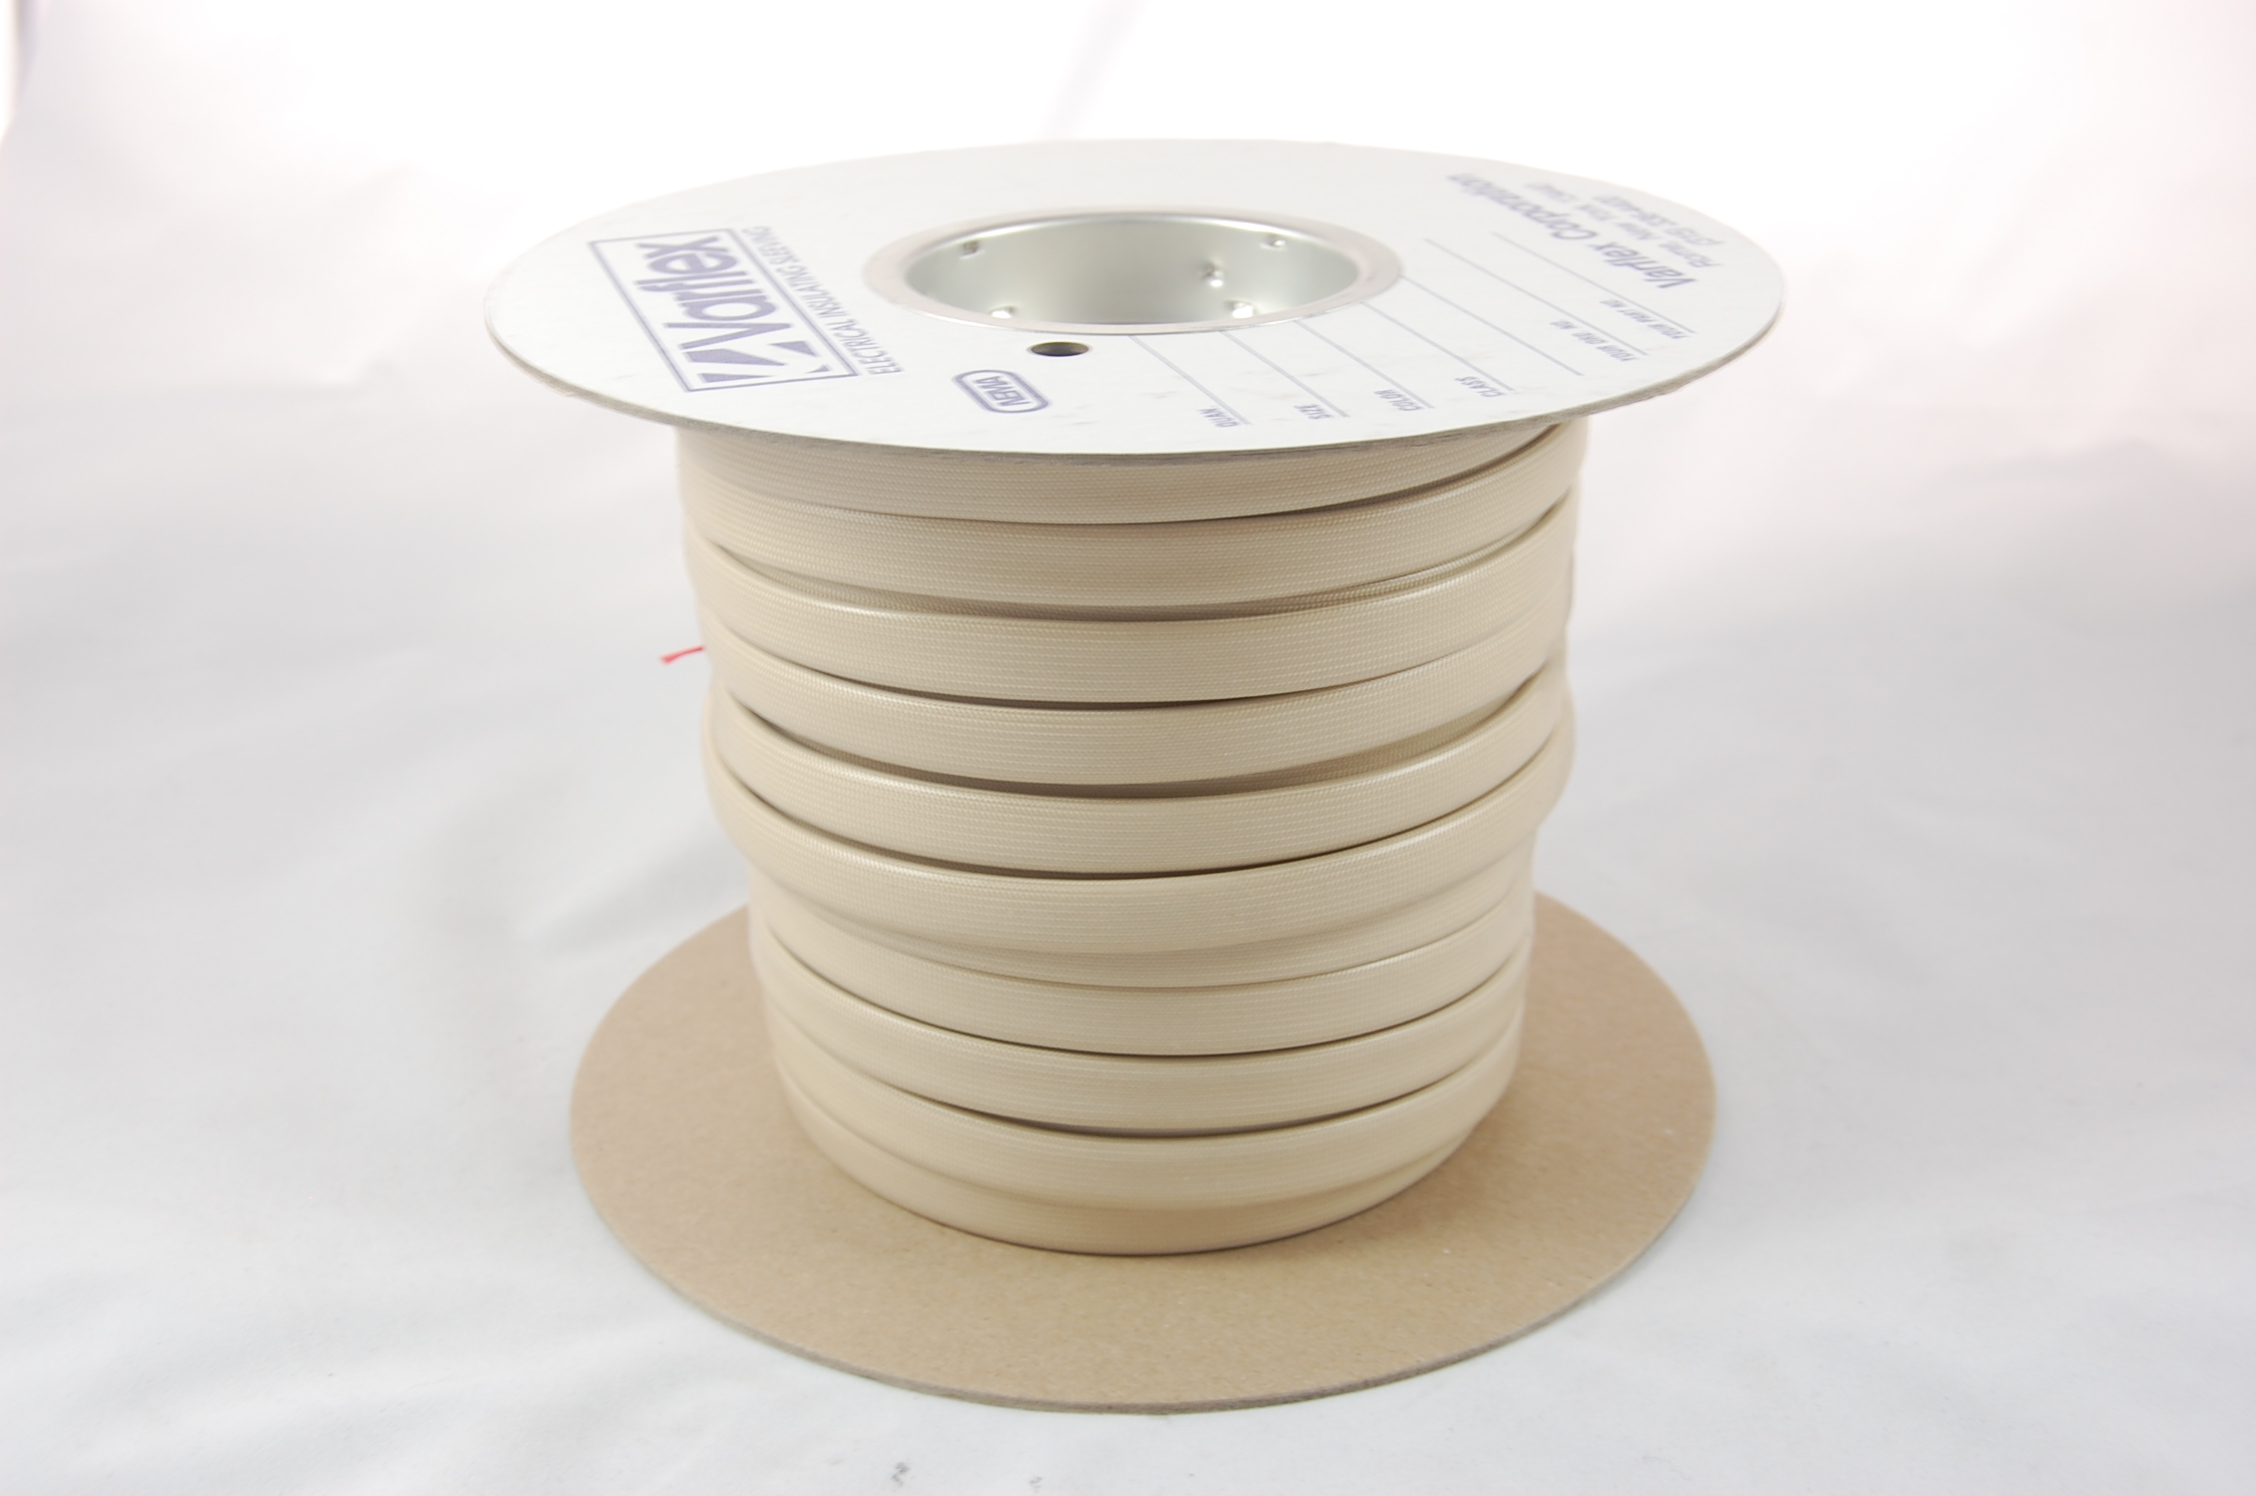 #0 AWG Varglas Silicone Rubber Grade H-A-1 (8000V) High Temperature Silicone Rubber Coated Braided Fiberglass Sleeving 200°C, natural, 150 FT per spool